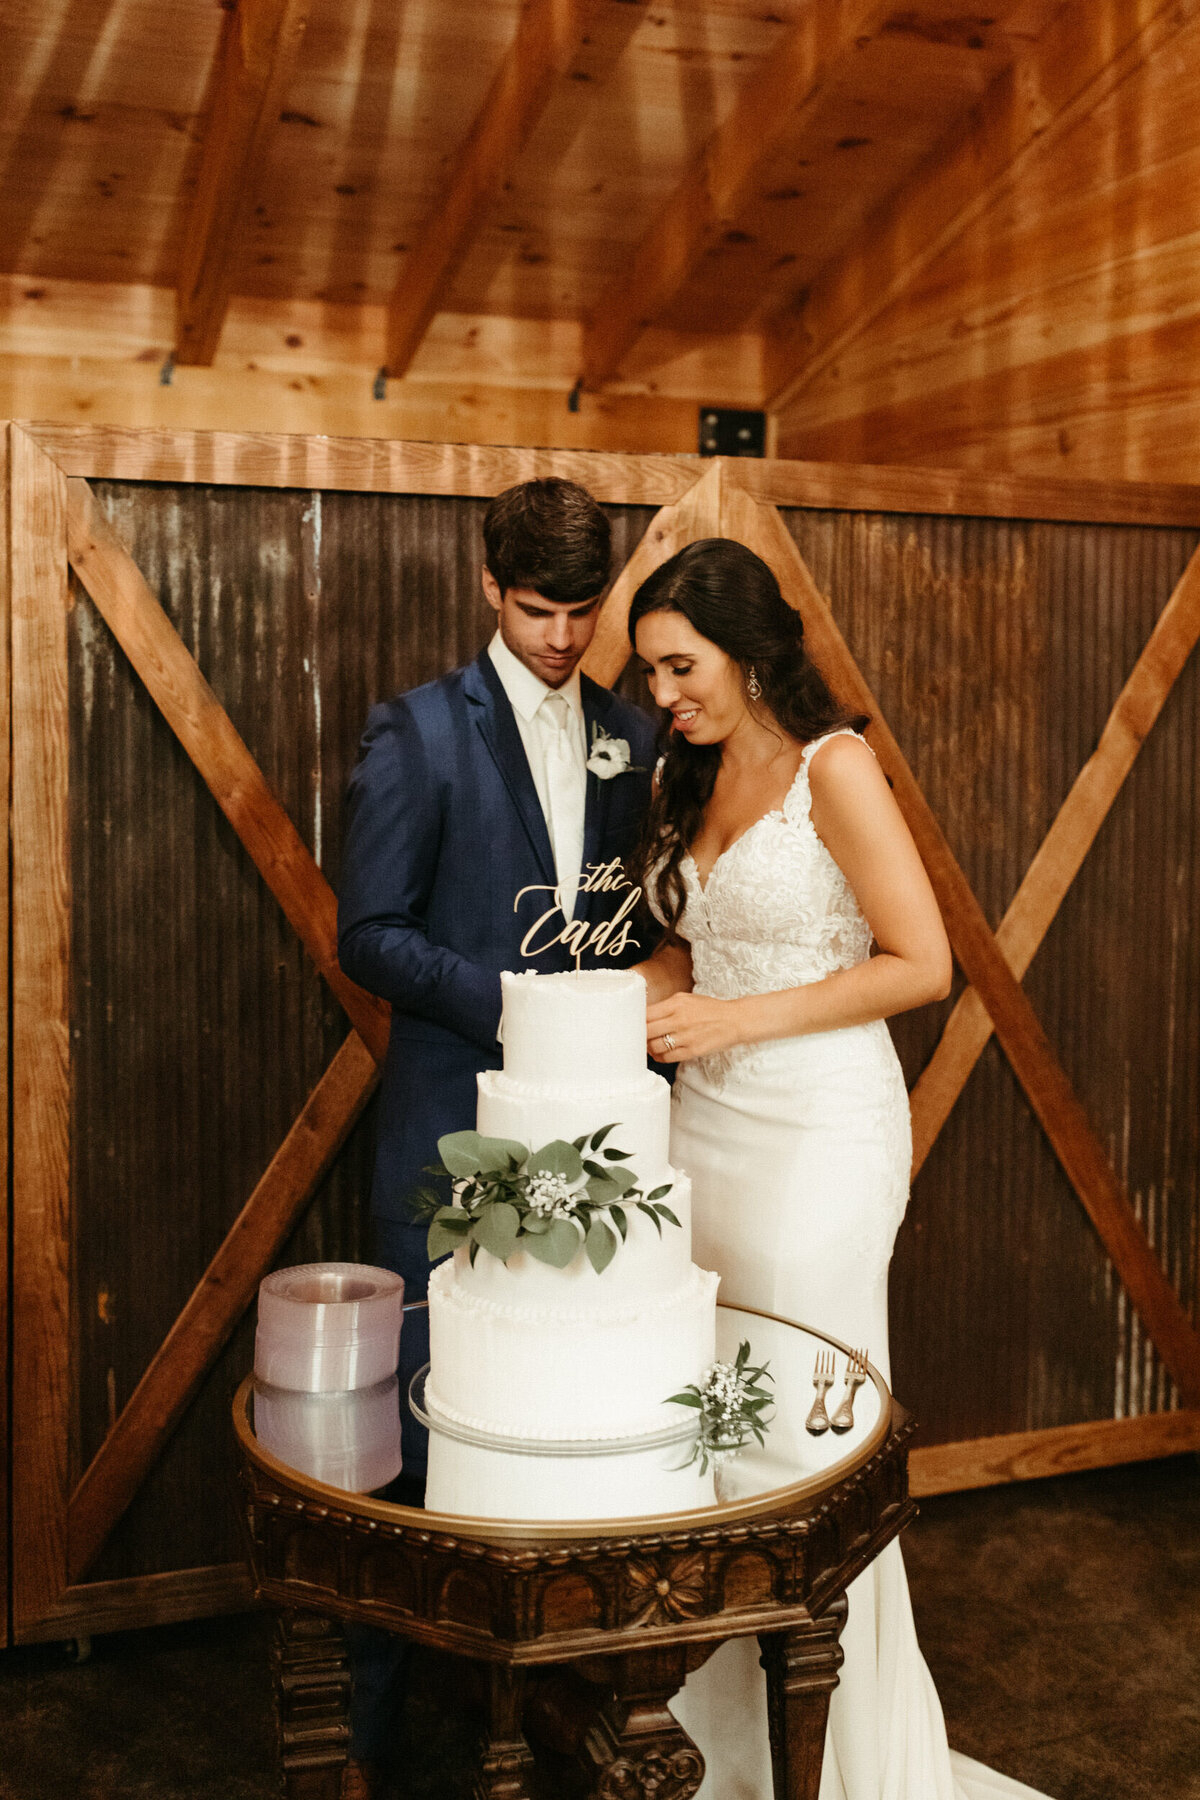 Bride and groom cutting their simple four tier wedding cake